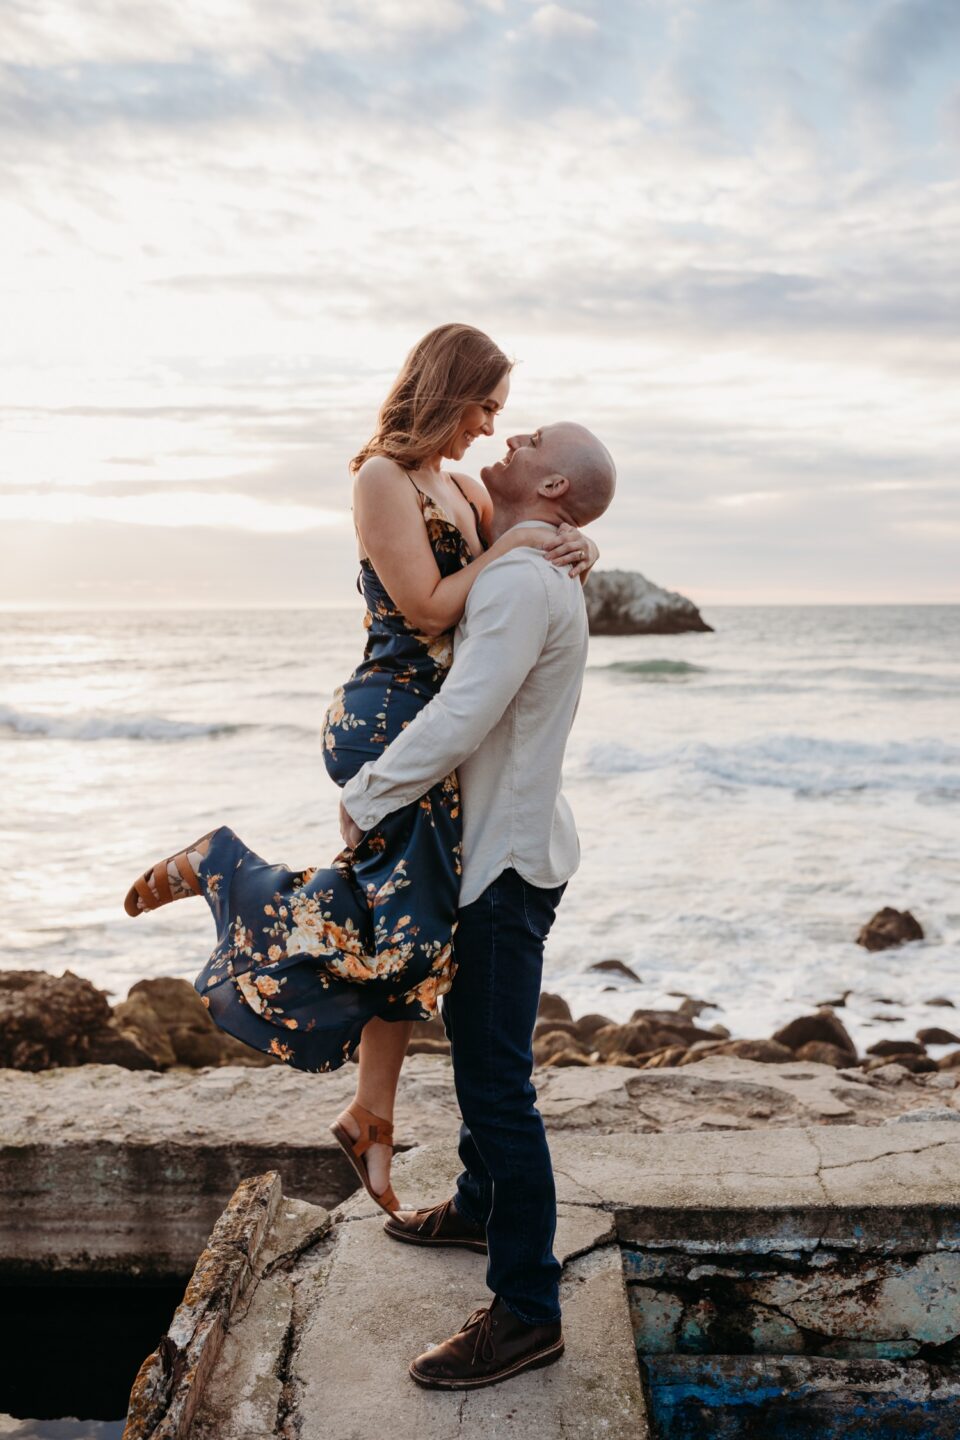 Man picks fiance up during their sunset engagement photoshoot at Sutro Baths in San Francisco.